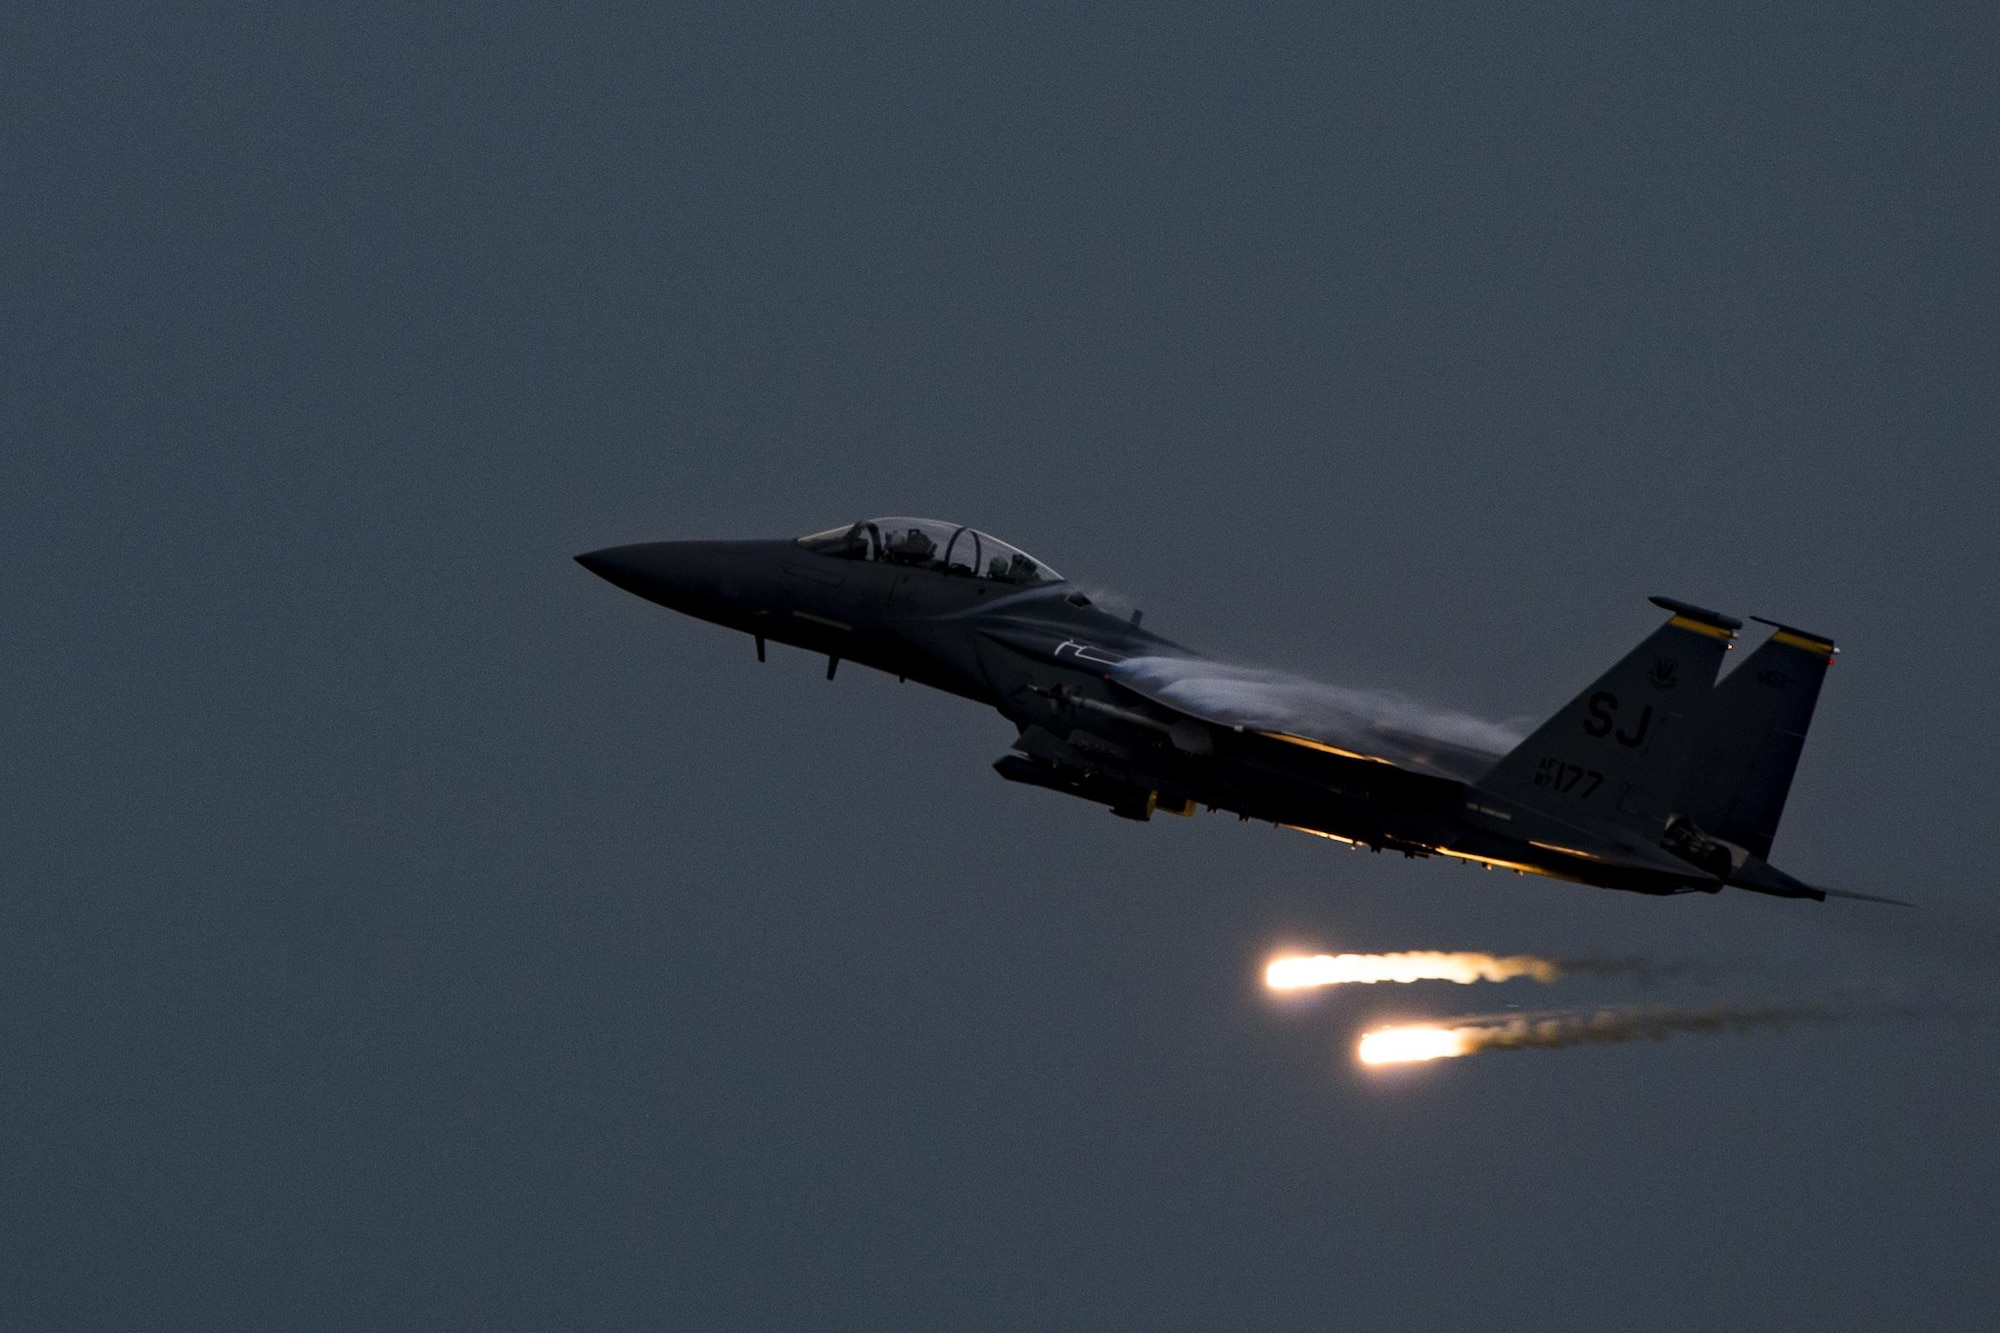 An F-15E Strike Eagle fires flares over Grand Bay Bombing and Gunnery Range at Moody Air Force Base, Ga., May 20, 2016. The F-15 participated in training in which multiple Air Combat Command aircraft conducted tactical air and ground maneuvers. (U.S. Air Force photo by Airman Daniel Snider/Released)